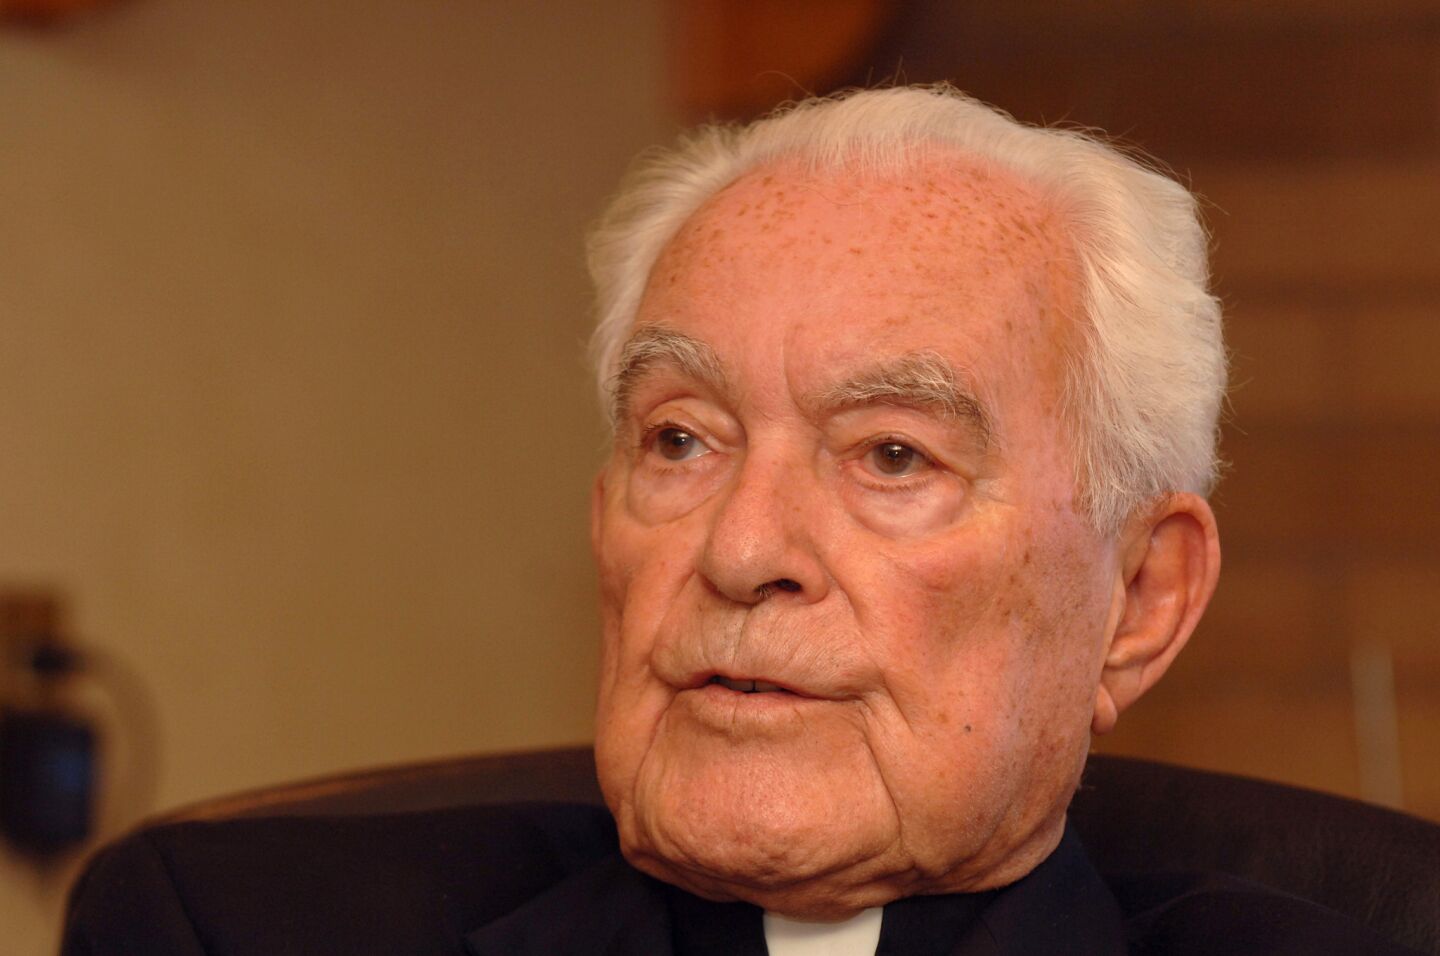 As the University of Notre Dame's president for 35 years, he helped build the university into an academic powerhouse. He was once featured on the cover of Time magazine, which described him as the most influential figure in the reshaping of Catholic education. He was 97. Full obituary